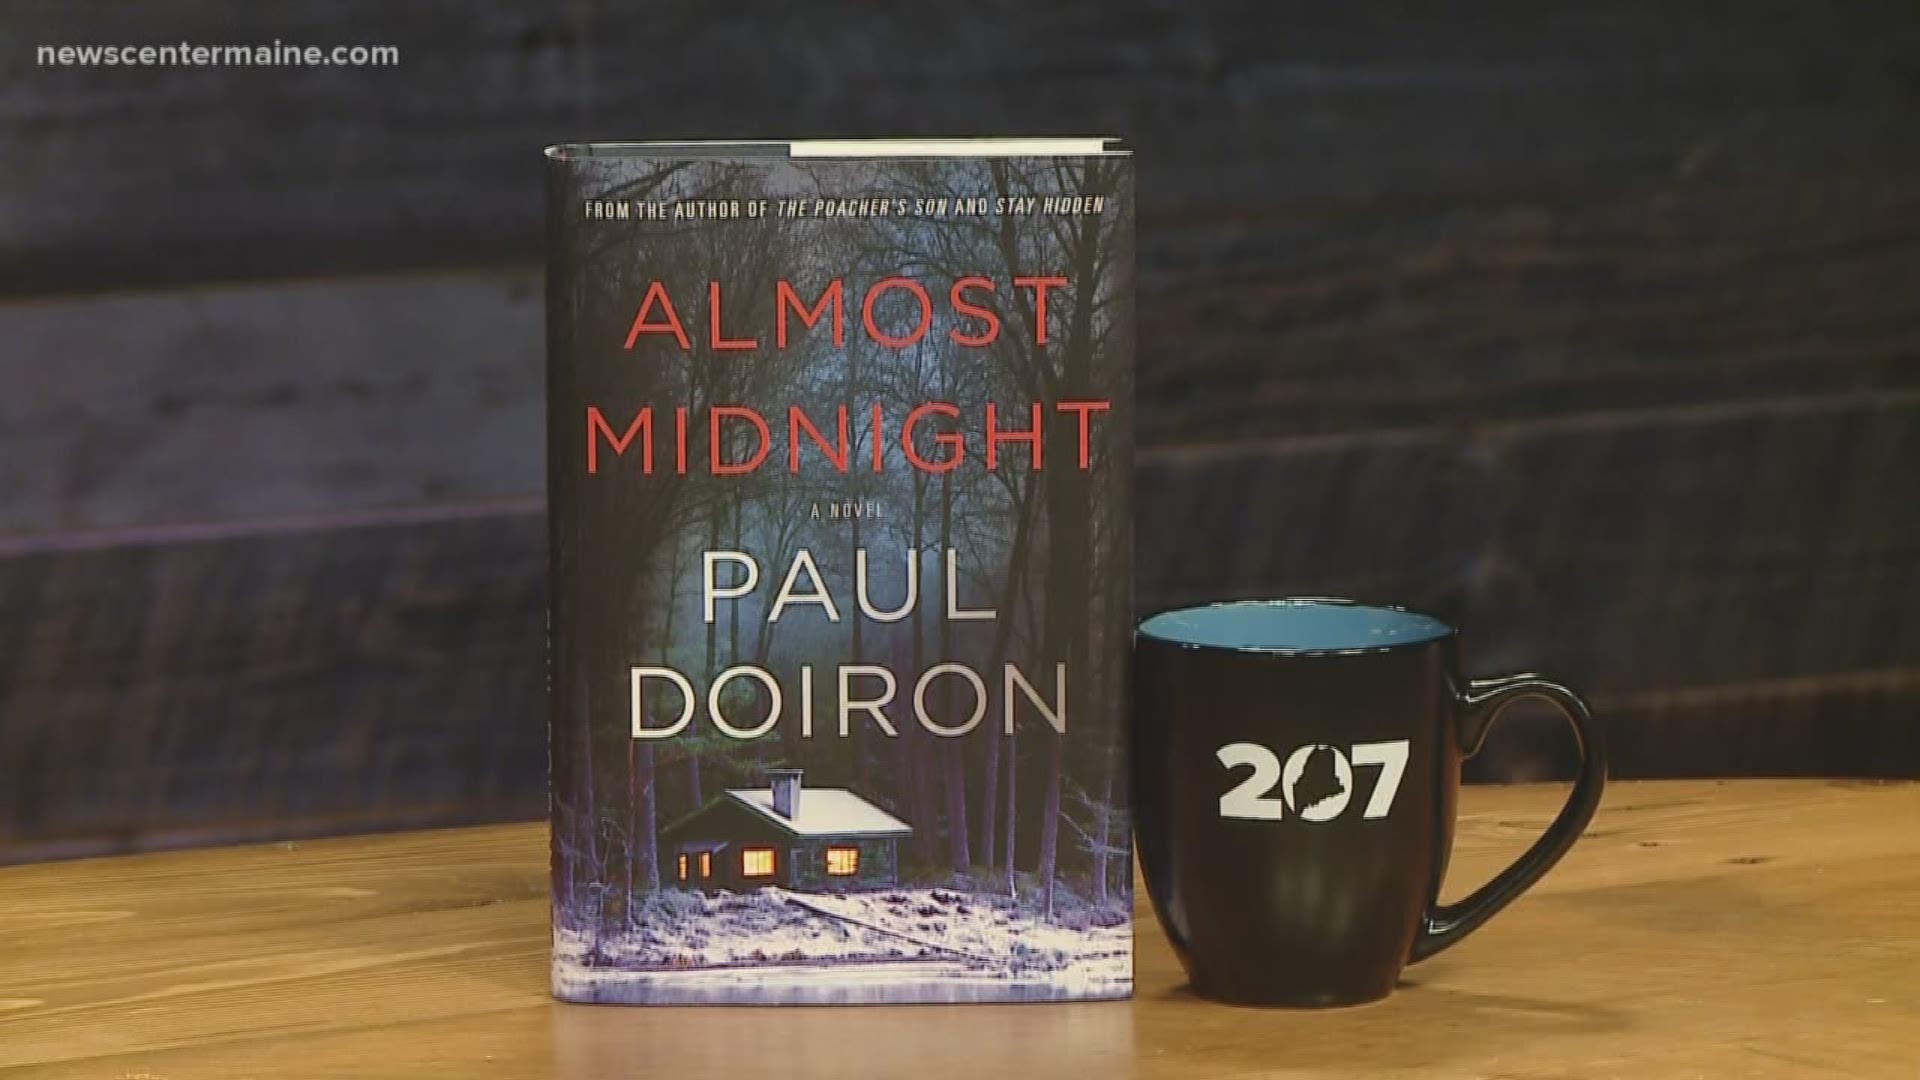 Crime writer Paul Doiron talks about his new Mike Bowditch novel.